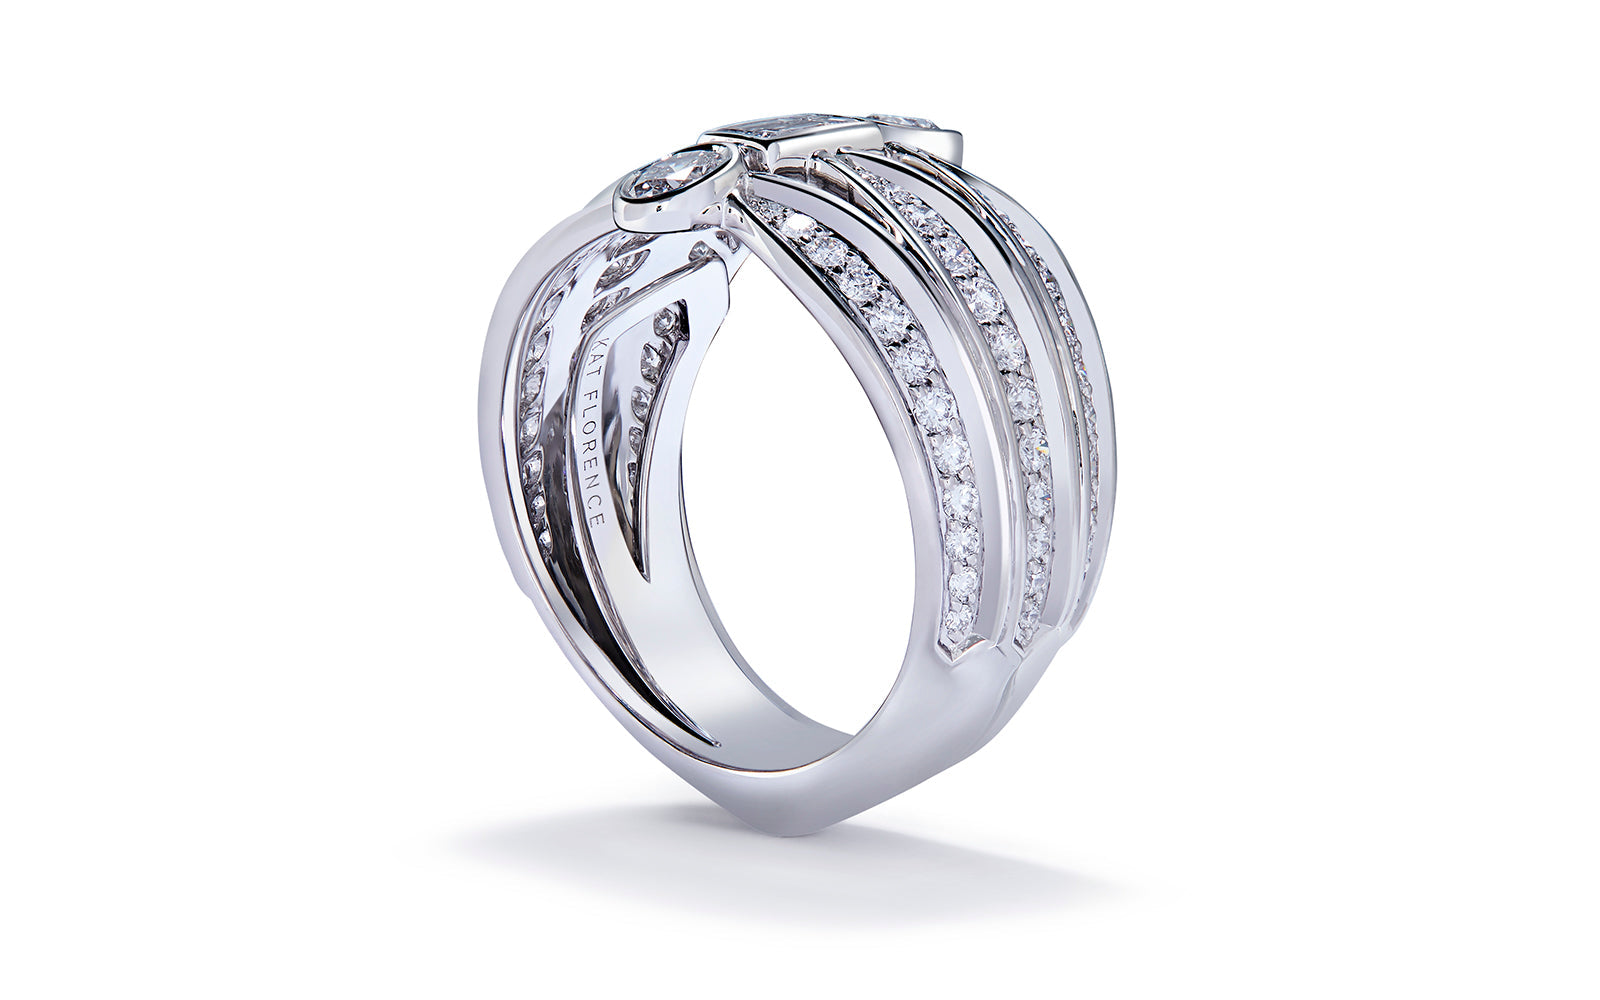 1.11ct D Flawless Diamonds Ring set in 18K White Gold